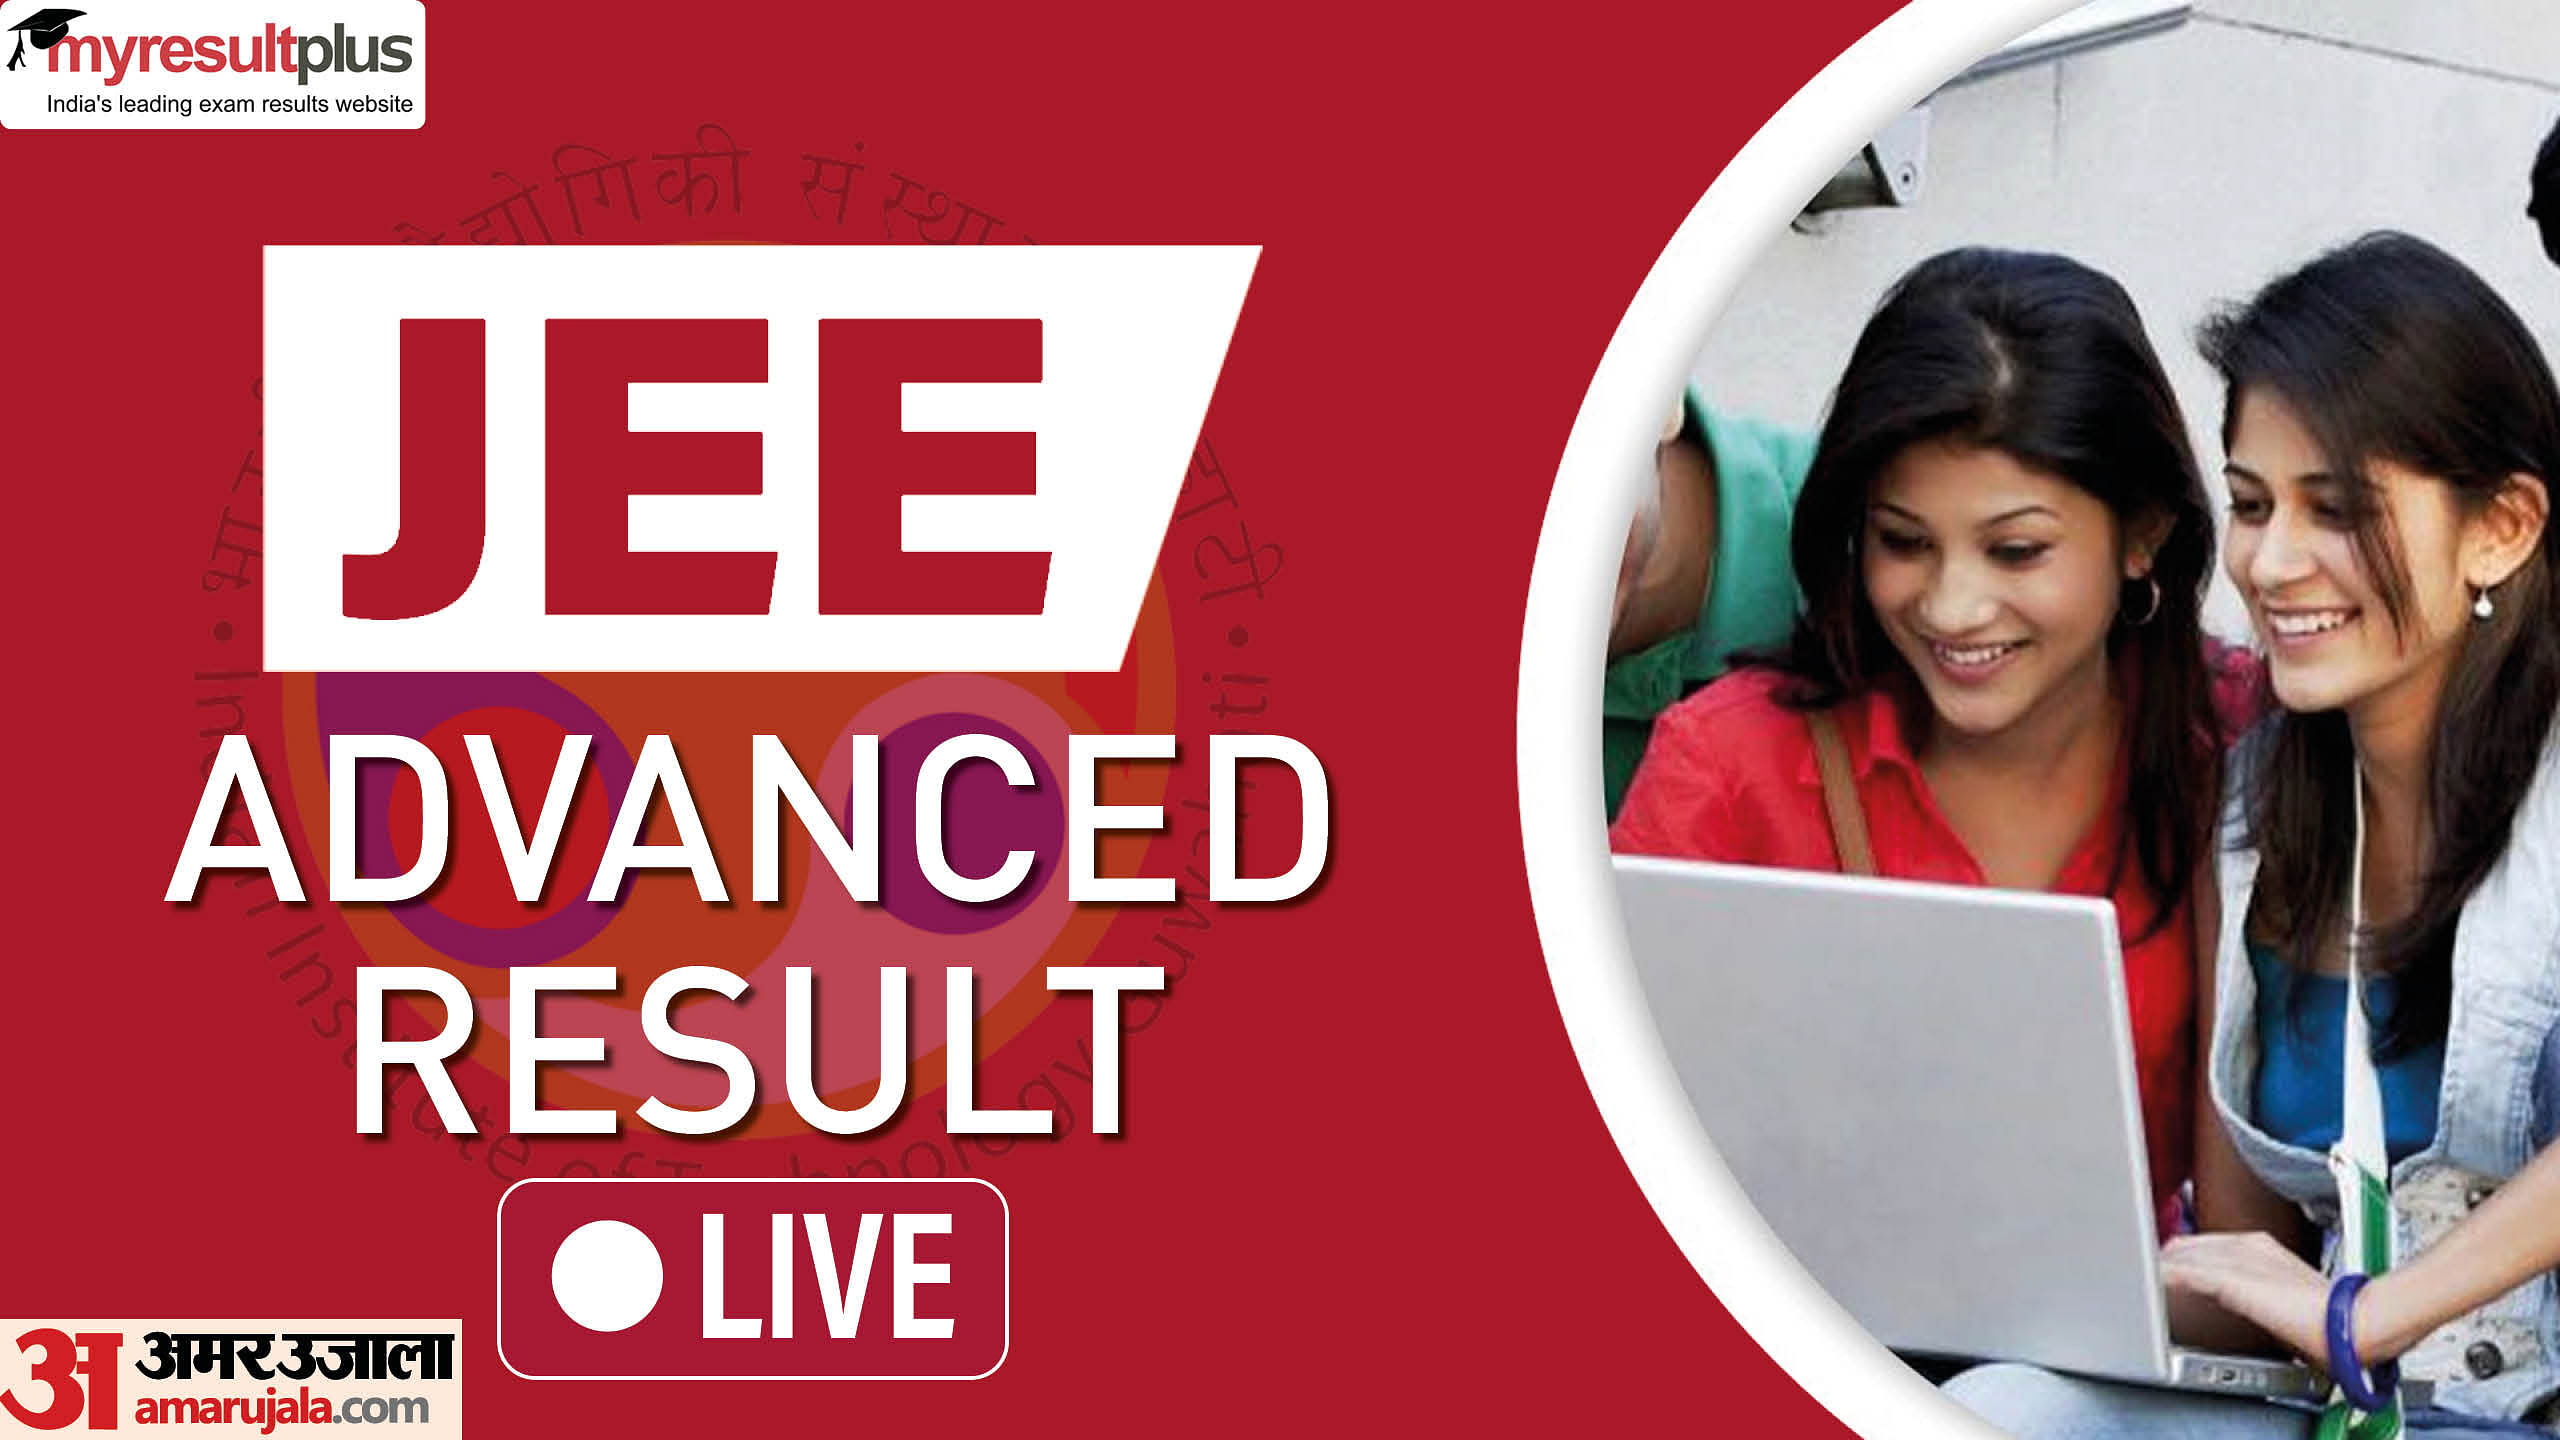 JEE Advanced Result Live: JEE Advanced Result 2023 Out, VC Reddy Tops, Check Latest Updates